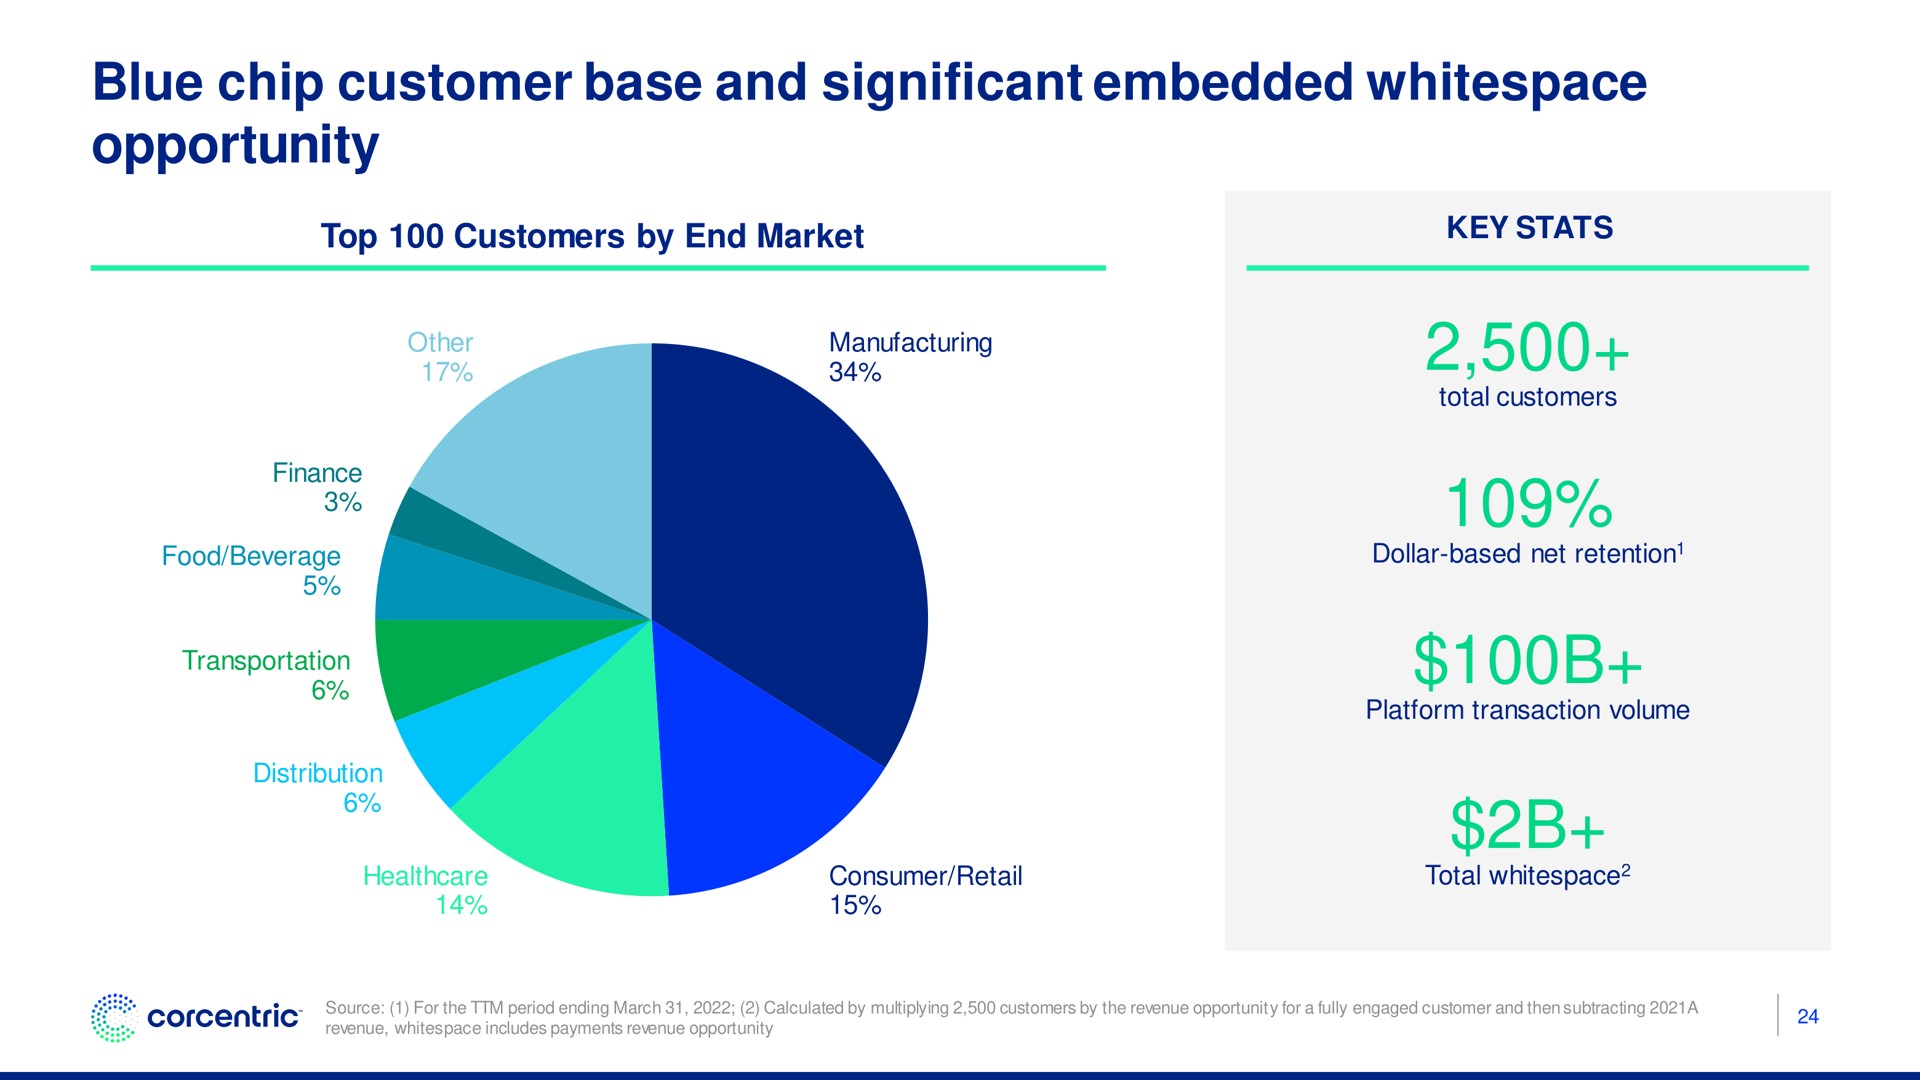 blue chip customer base and significant embedded opportunity vie | Corecentric